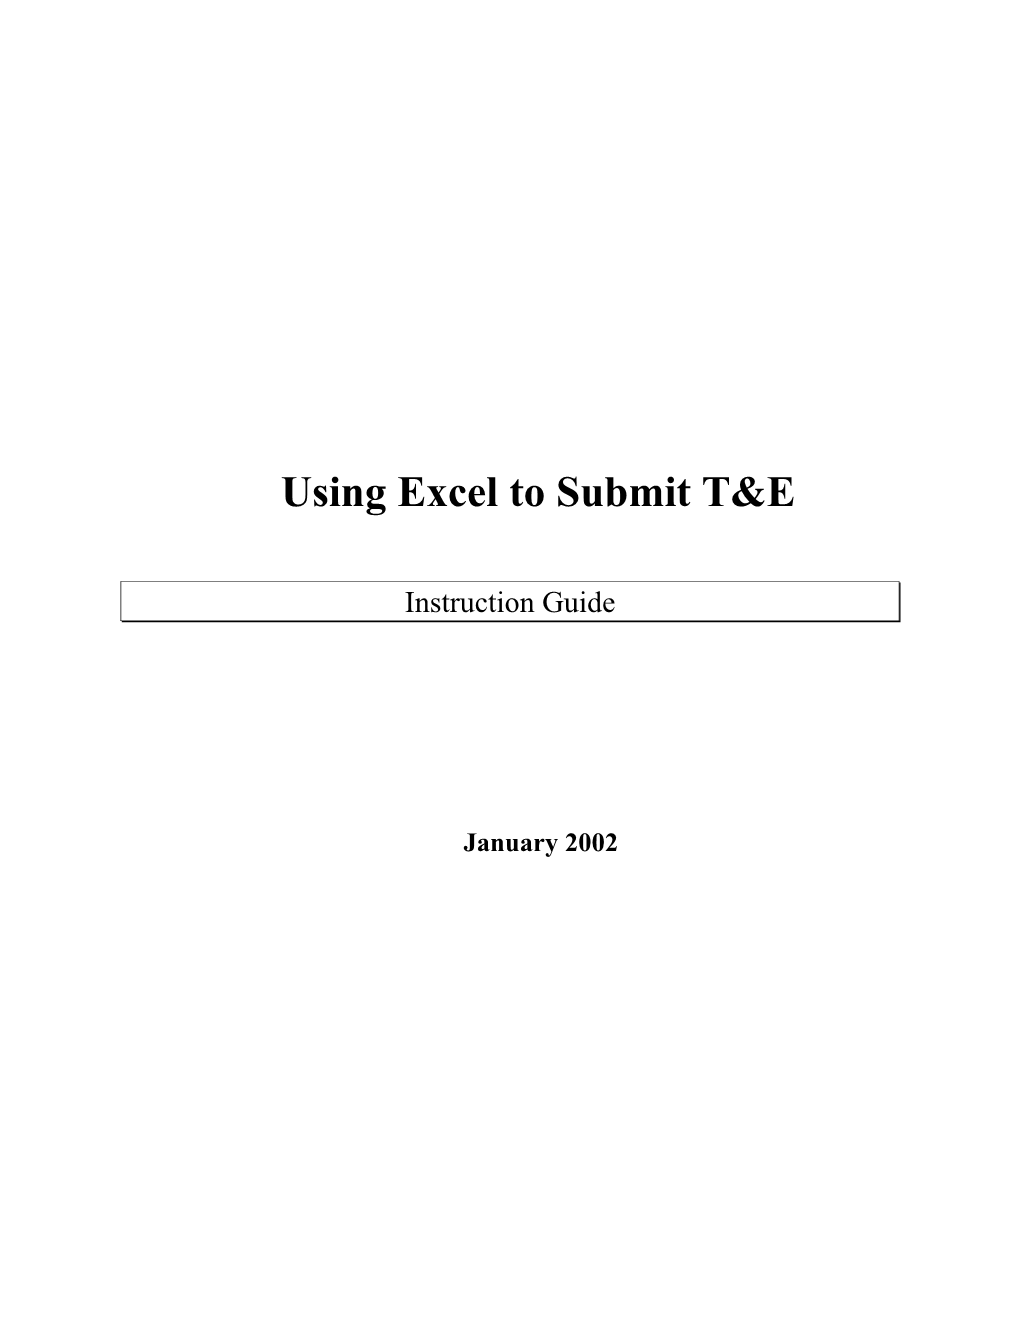 Using Excel to Submit T&E